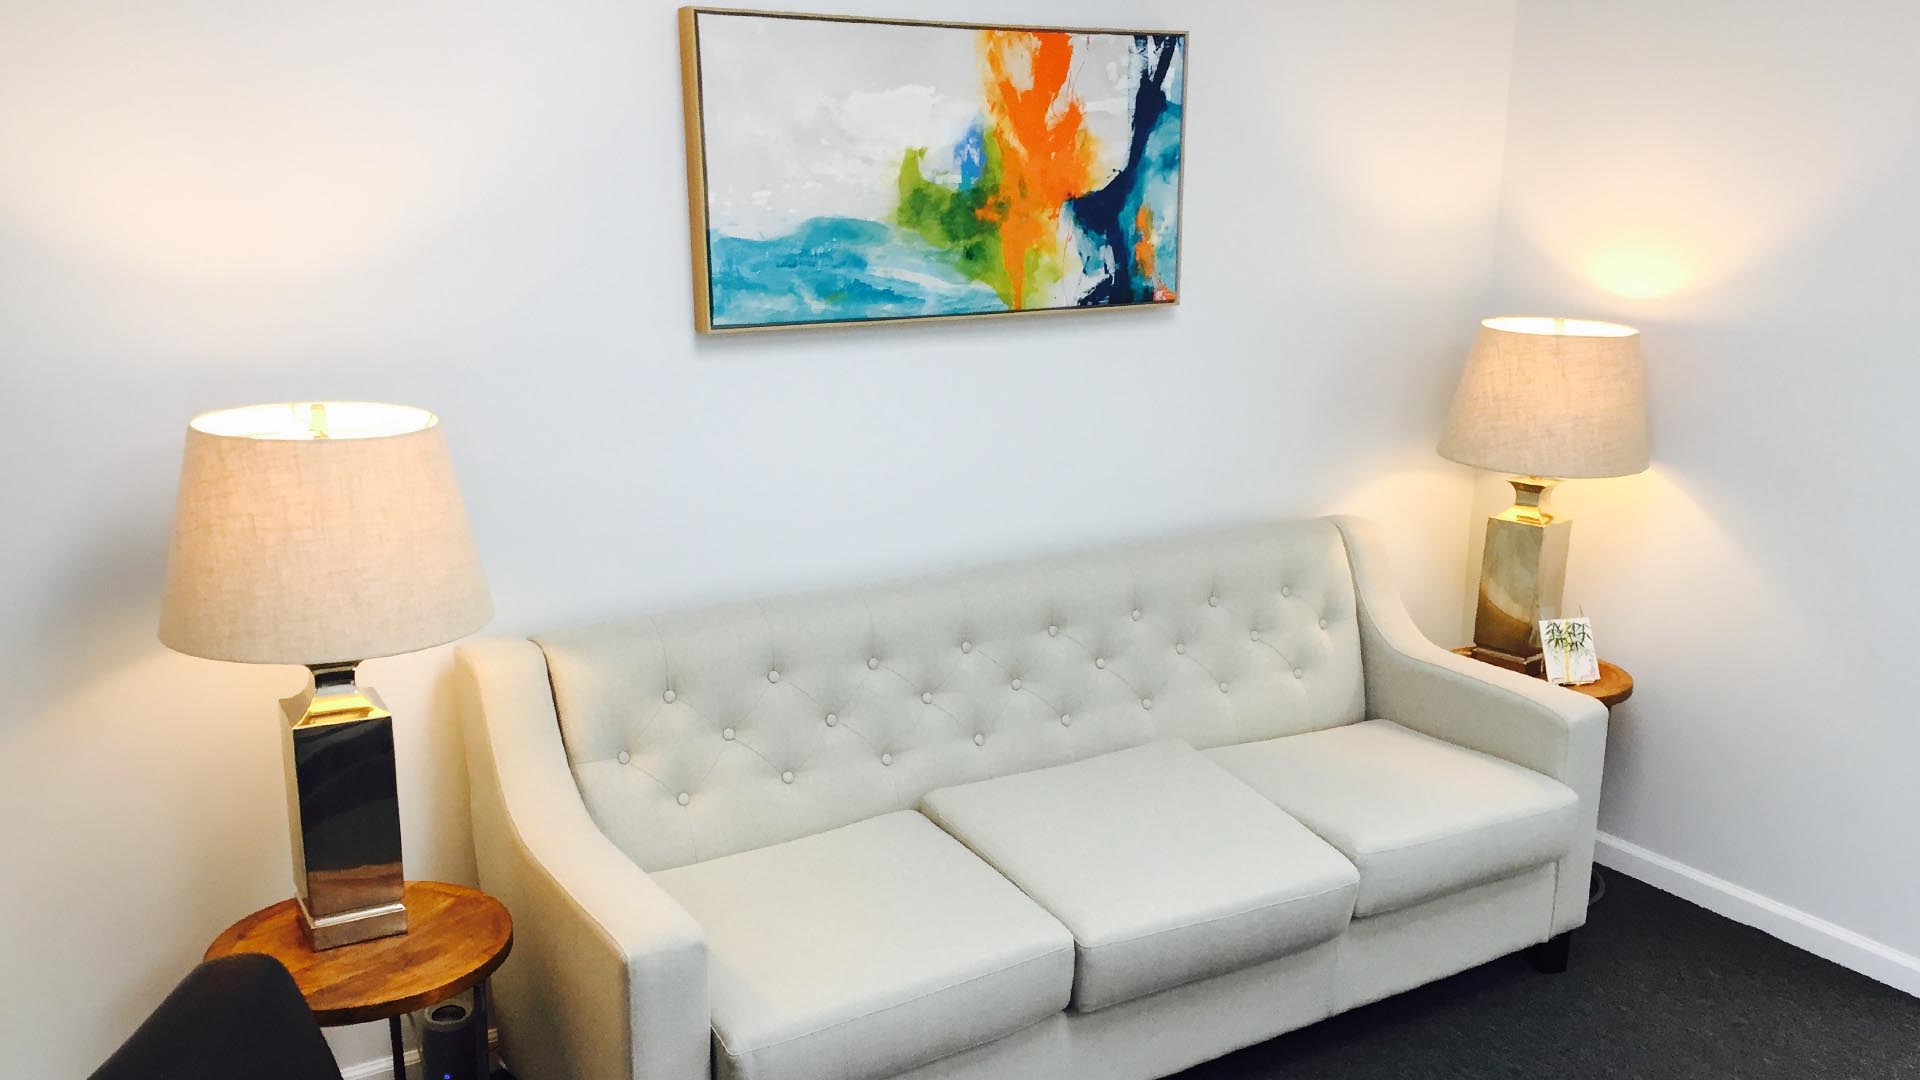 couch and painting in Lifescape Law & Development office interior